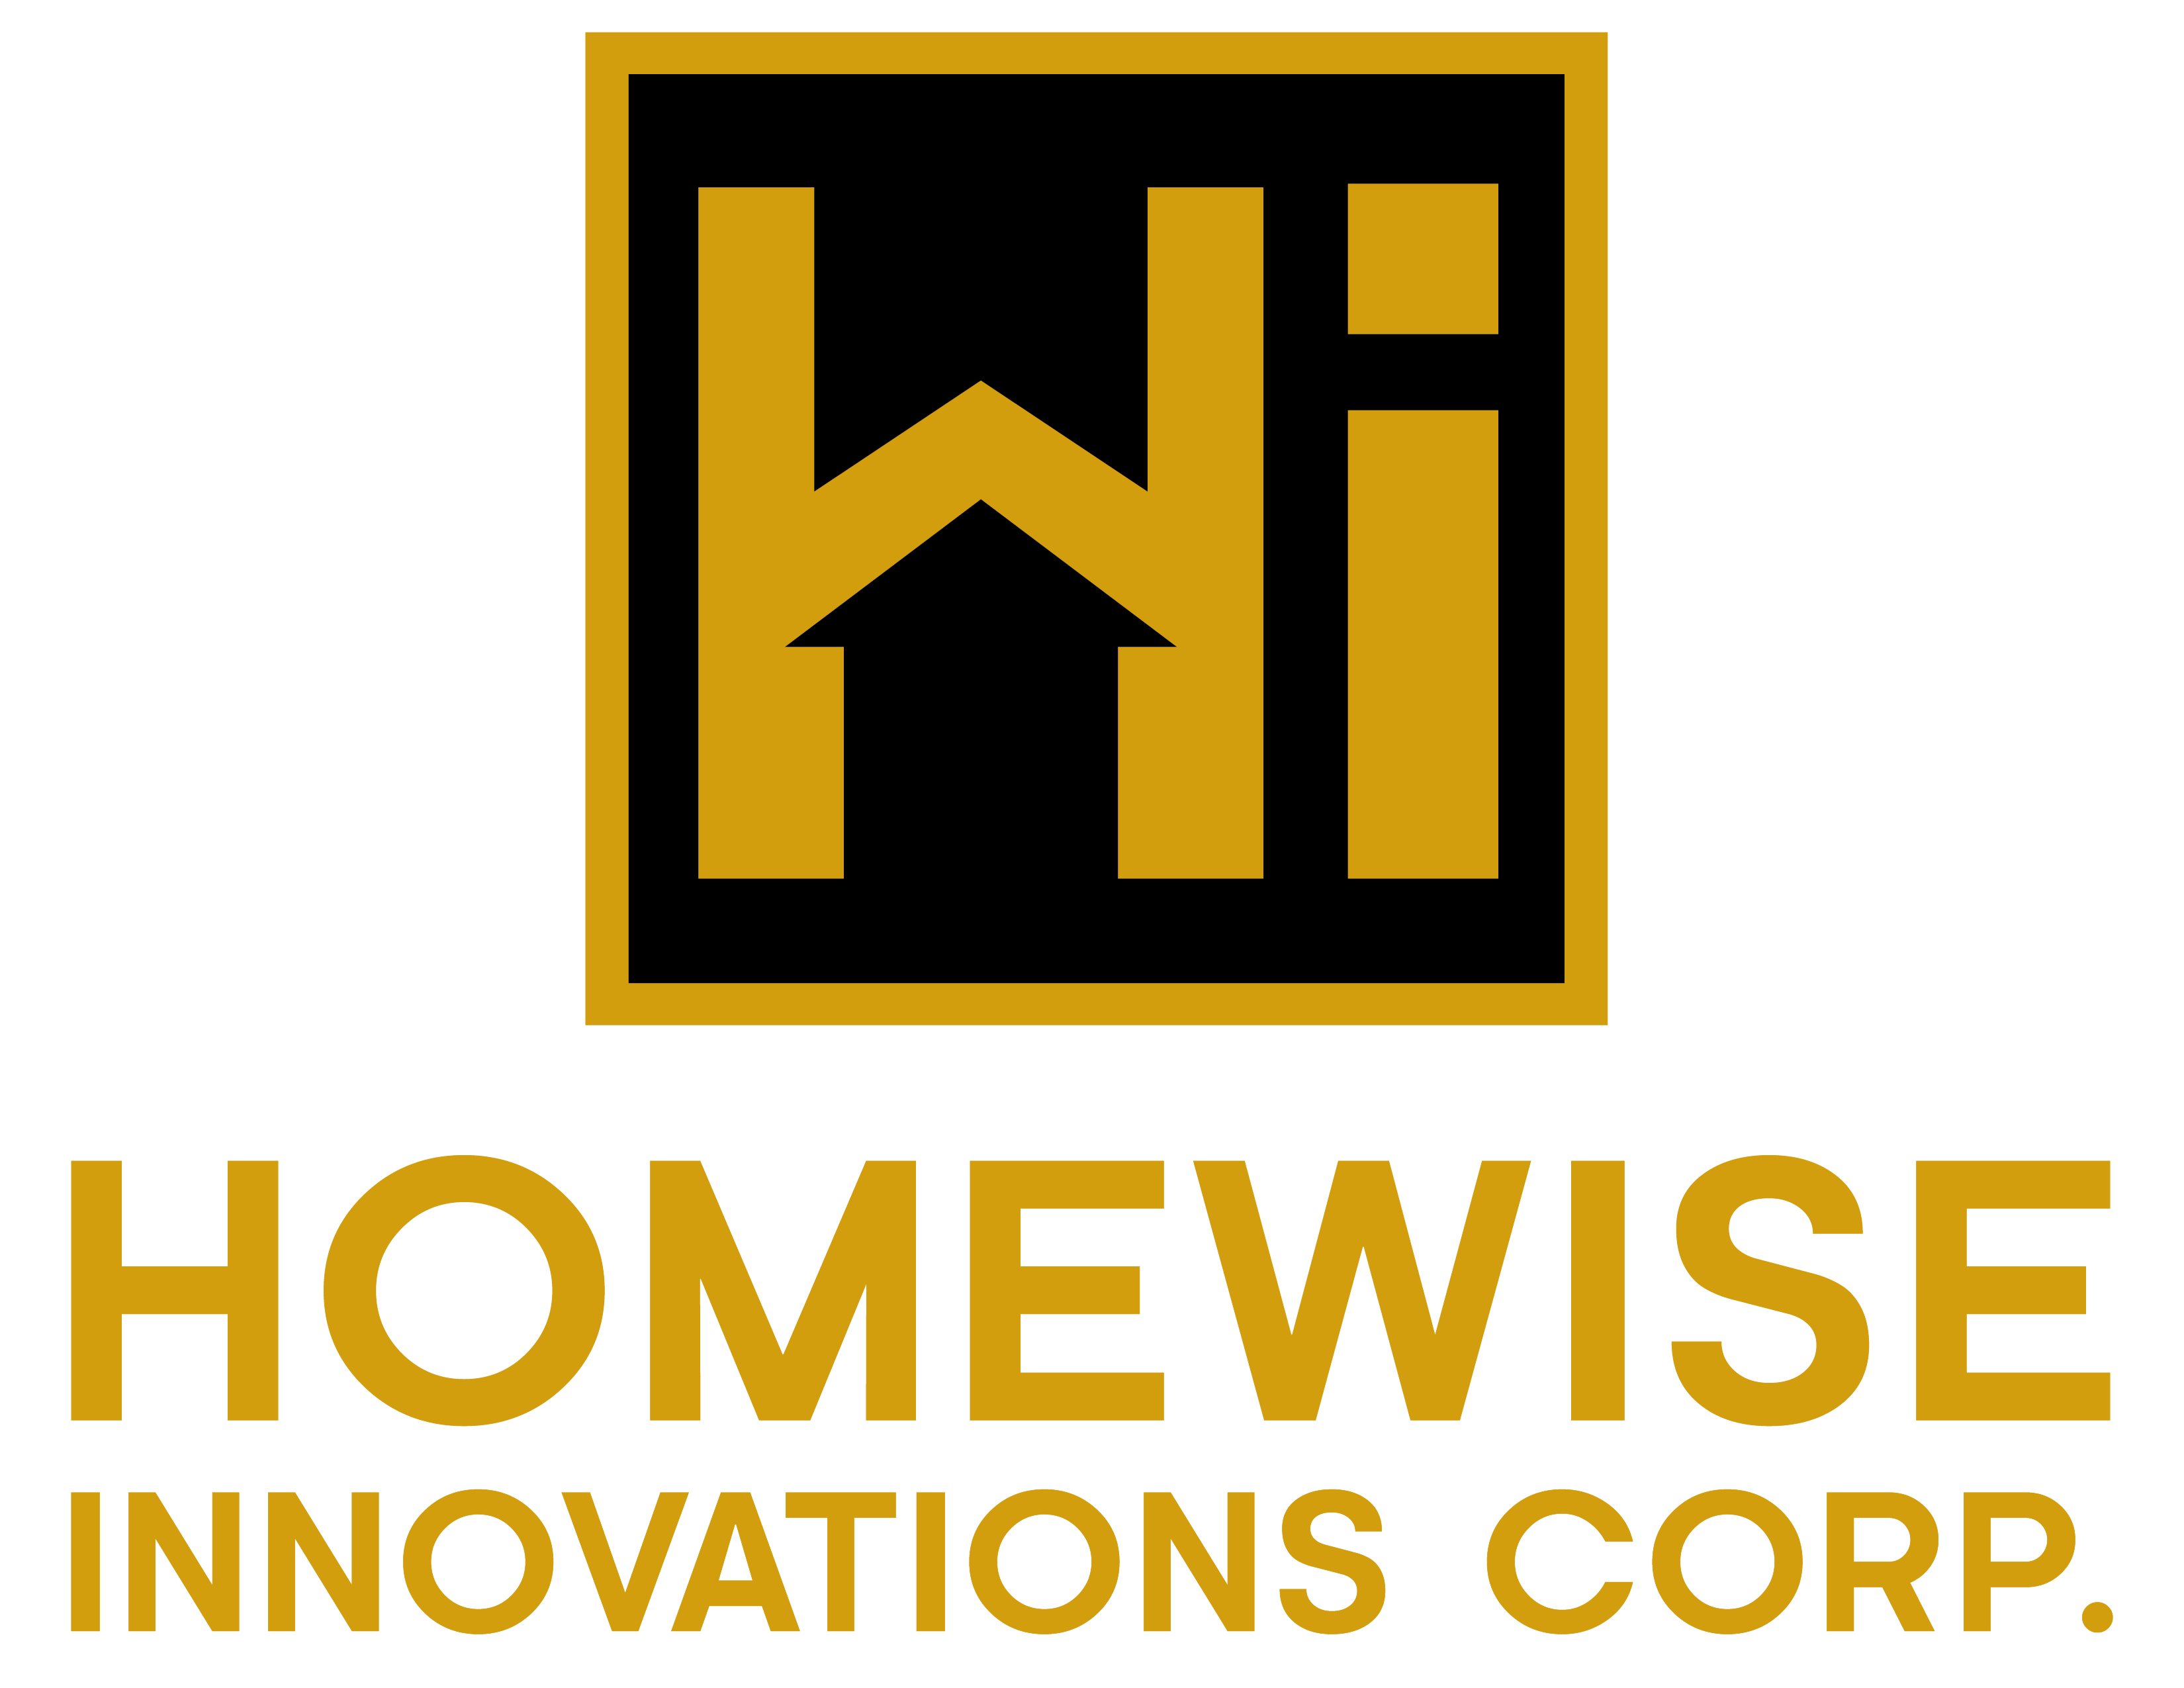 Homewise Innovations Corp.'s logo